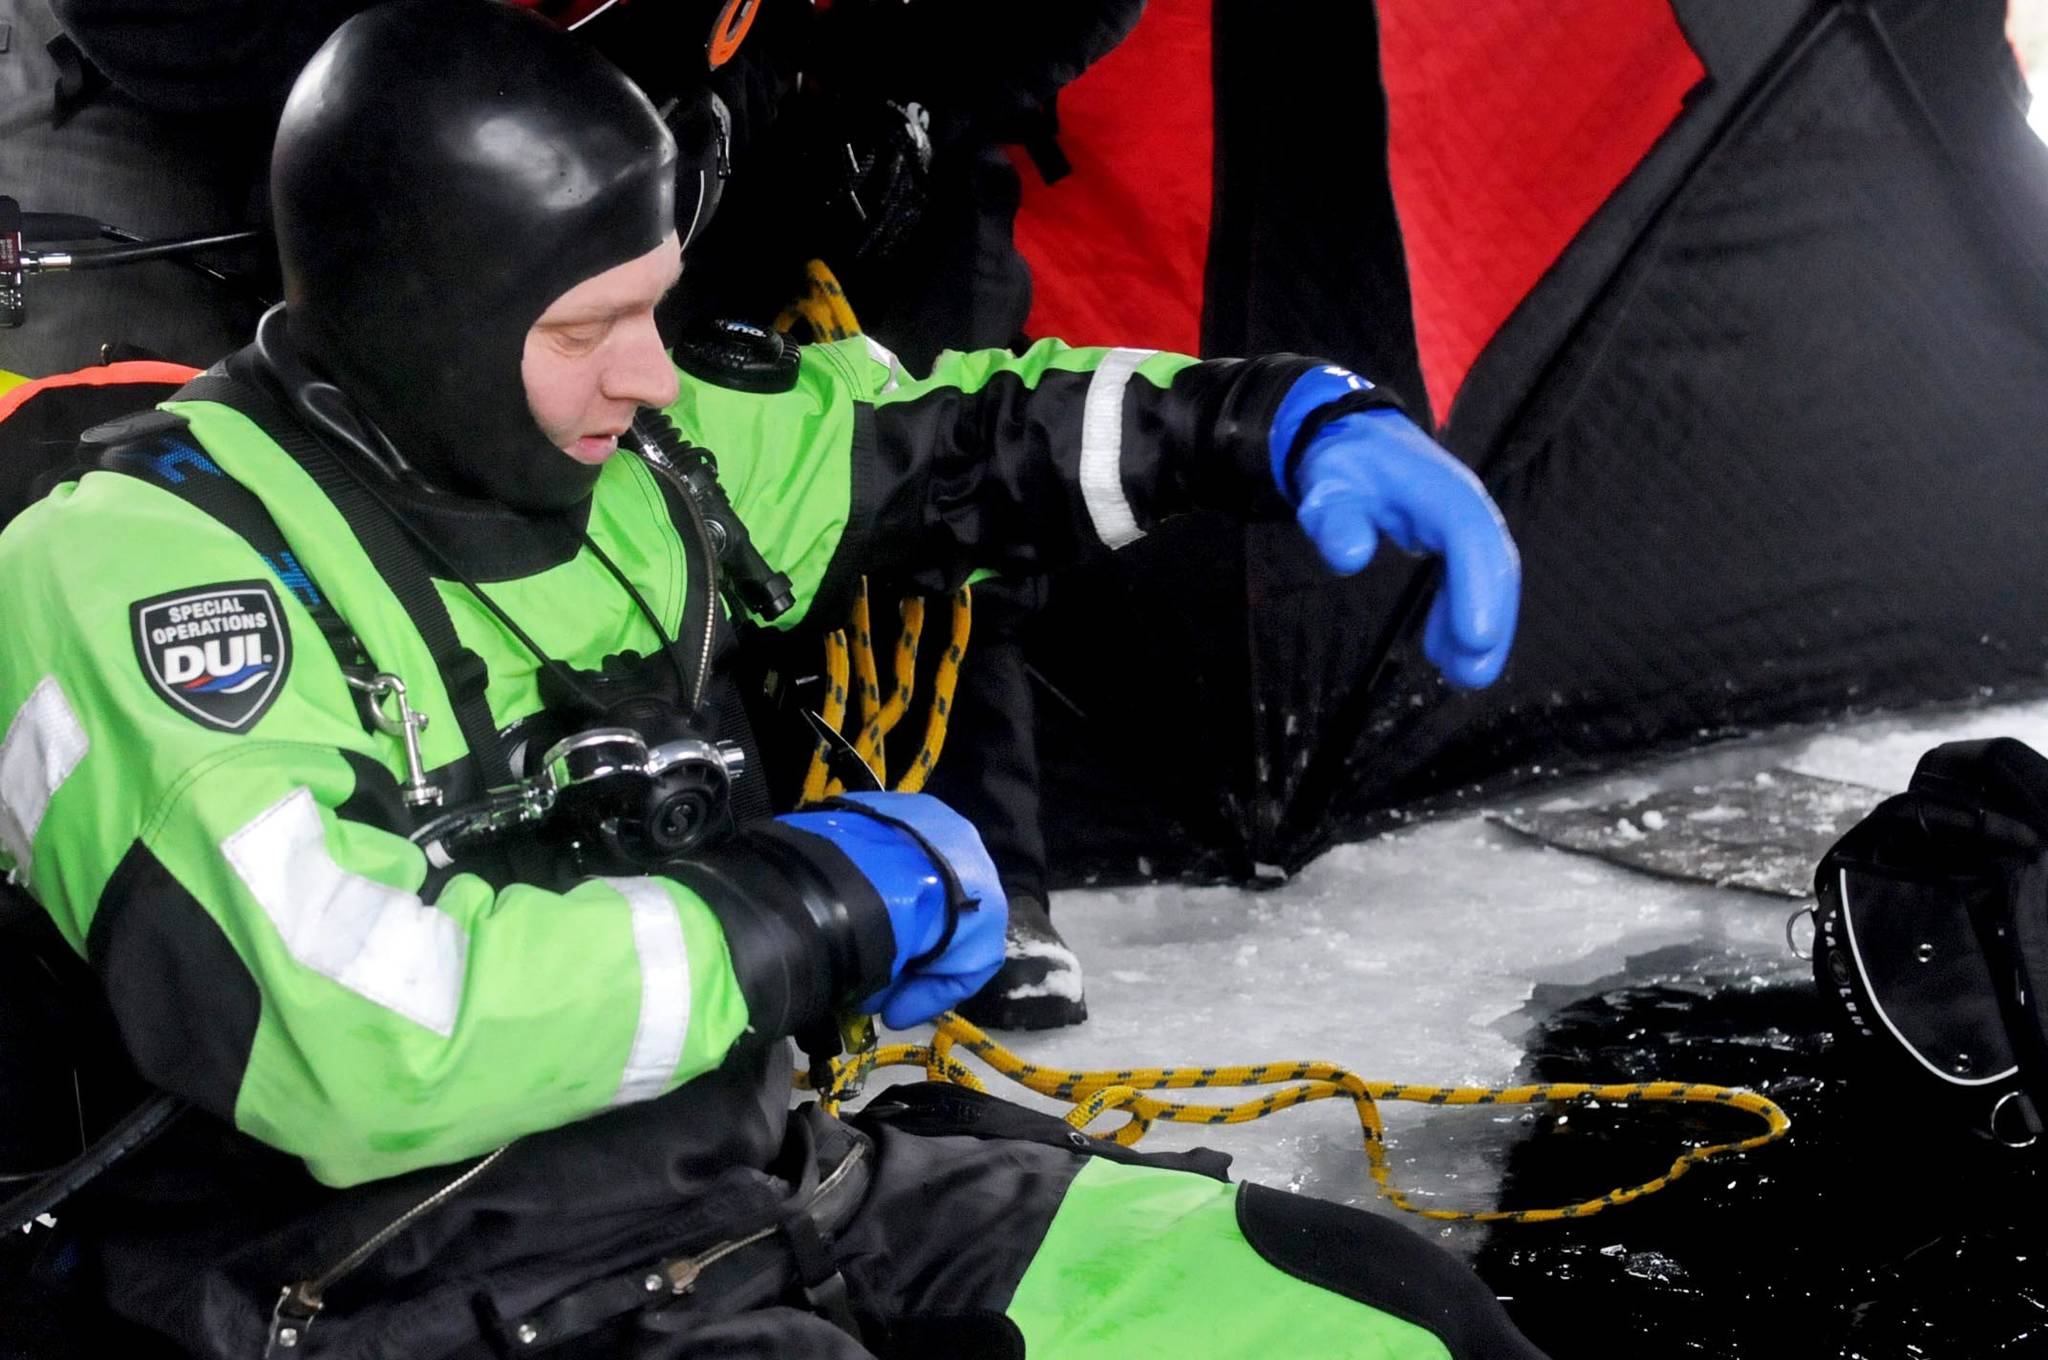 Matt Quiner of the Nikiski Fire Department checks his gear before dropping through a hole in the ice covering Island Lake as part of a training drill Friday, March 9, 2018 in Nikiski, Alaska. The Nikiski Fire Department is working on bringing all the members of its ice diving team up to proper certifications. To attain full certifications, divers have to clock a number of hours in the water, including practicing beneath the ice. (Photo by Elizabeth Earl/Peninsula Clarion)